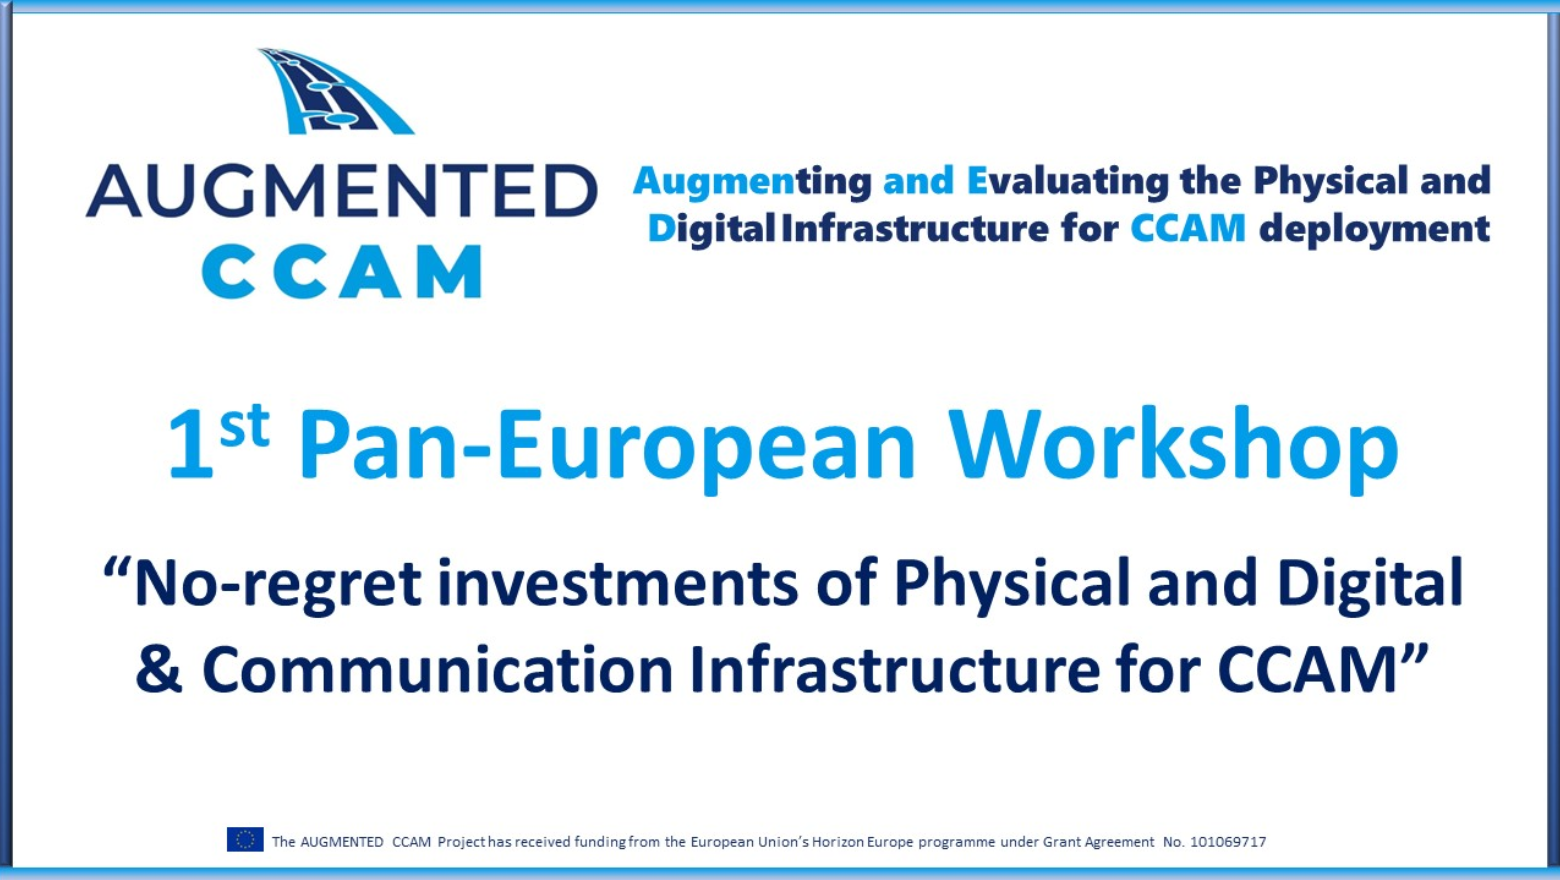 Workshop “No-regret investments of Physical and Digital & Communication Infrastructure for CCAM”